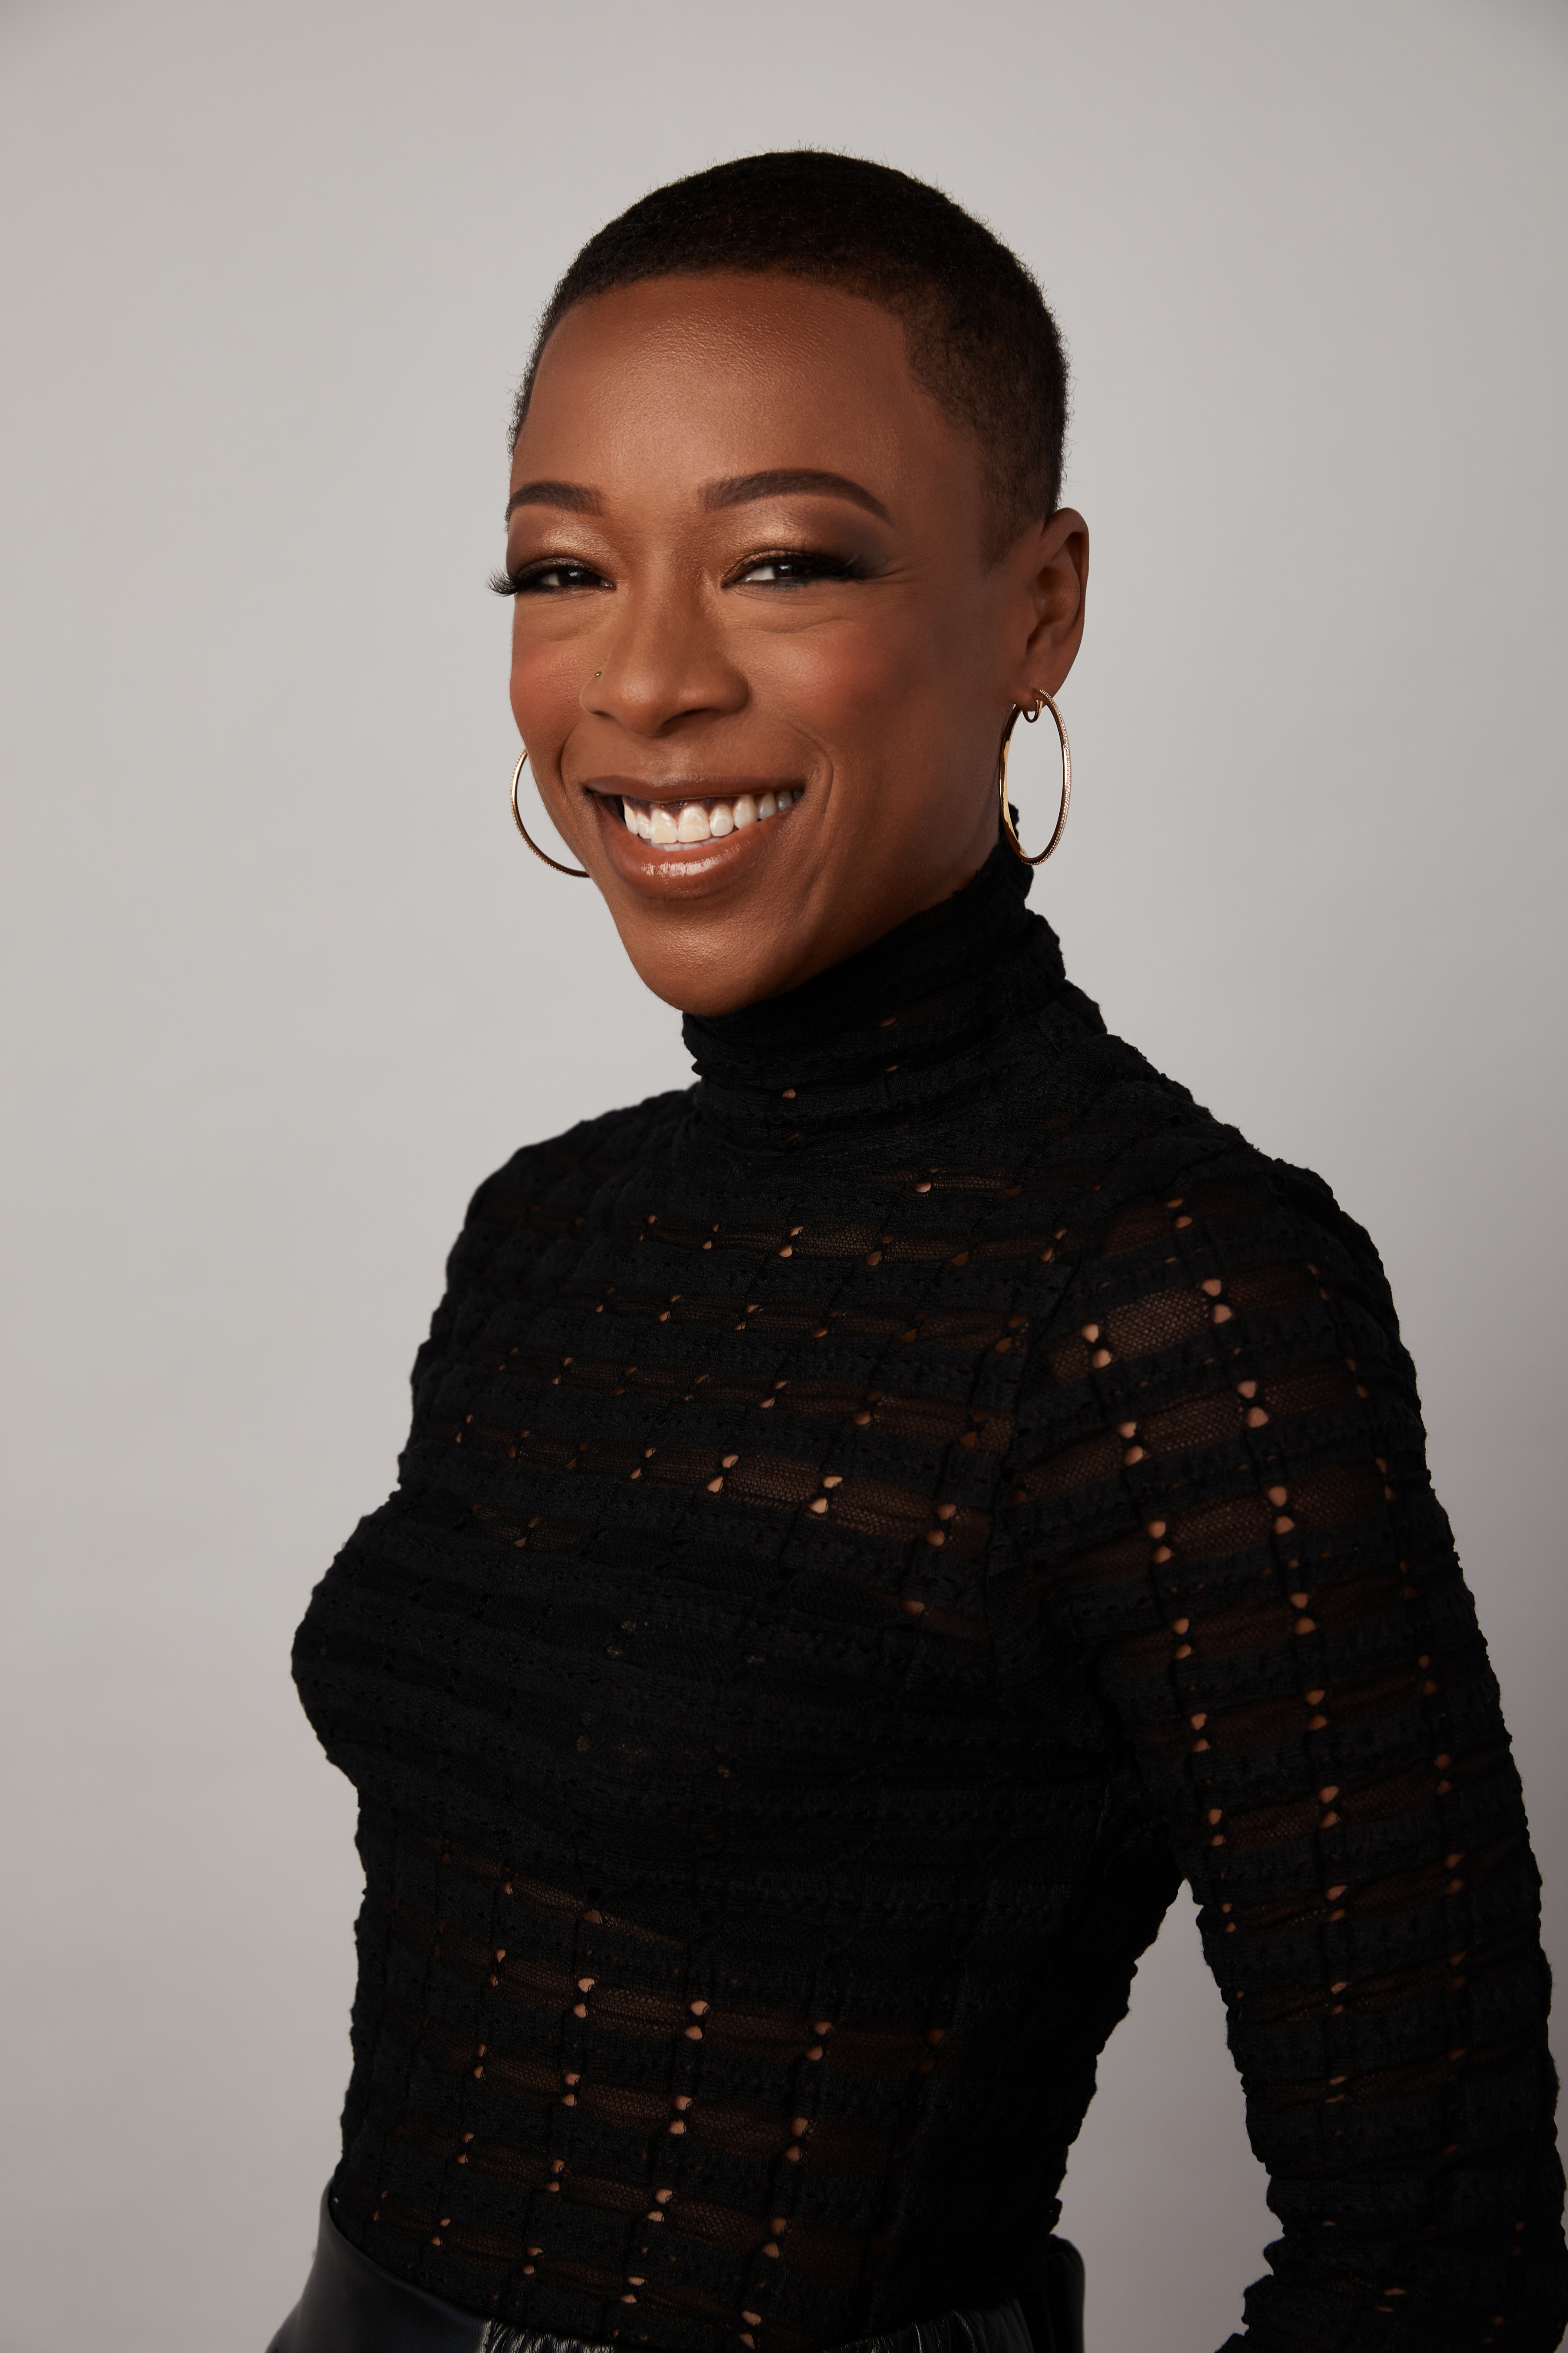 Samira Wiley in a textured top with earrings, smiling at the camera